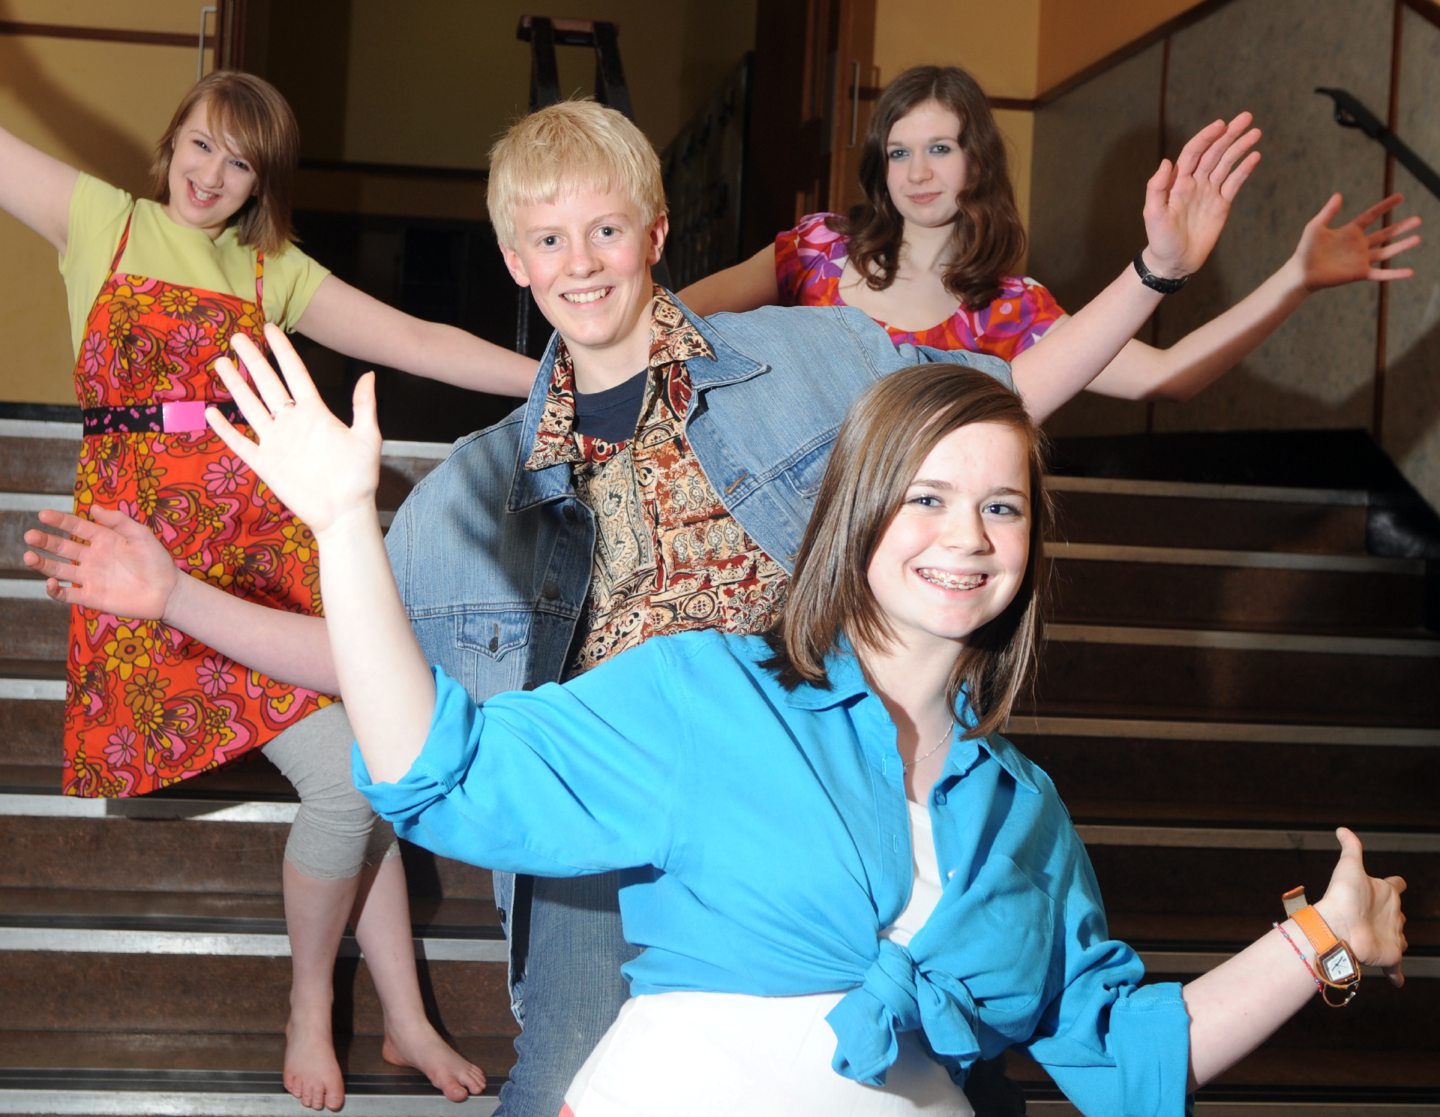 Four Inverurie Academy pupils posing for photos with jazz hands